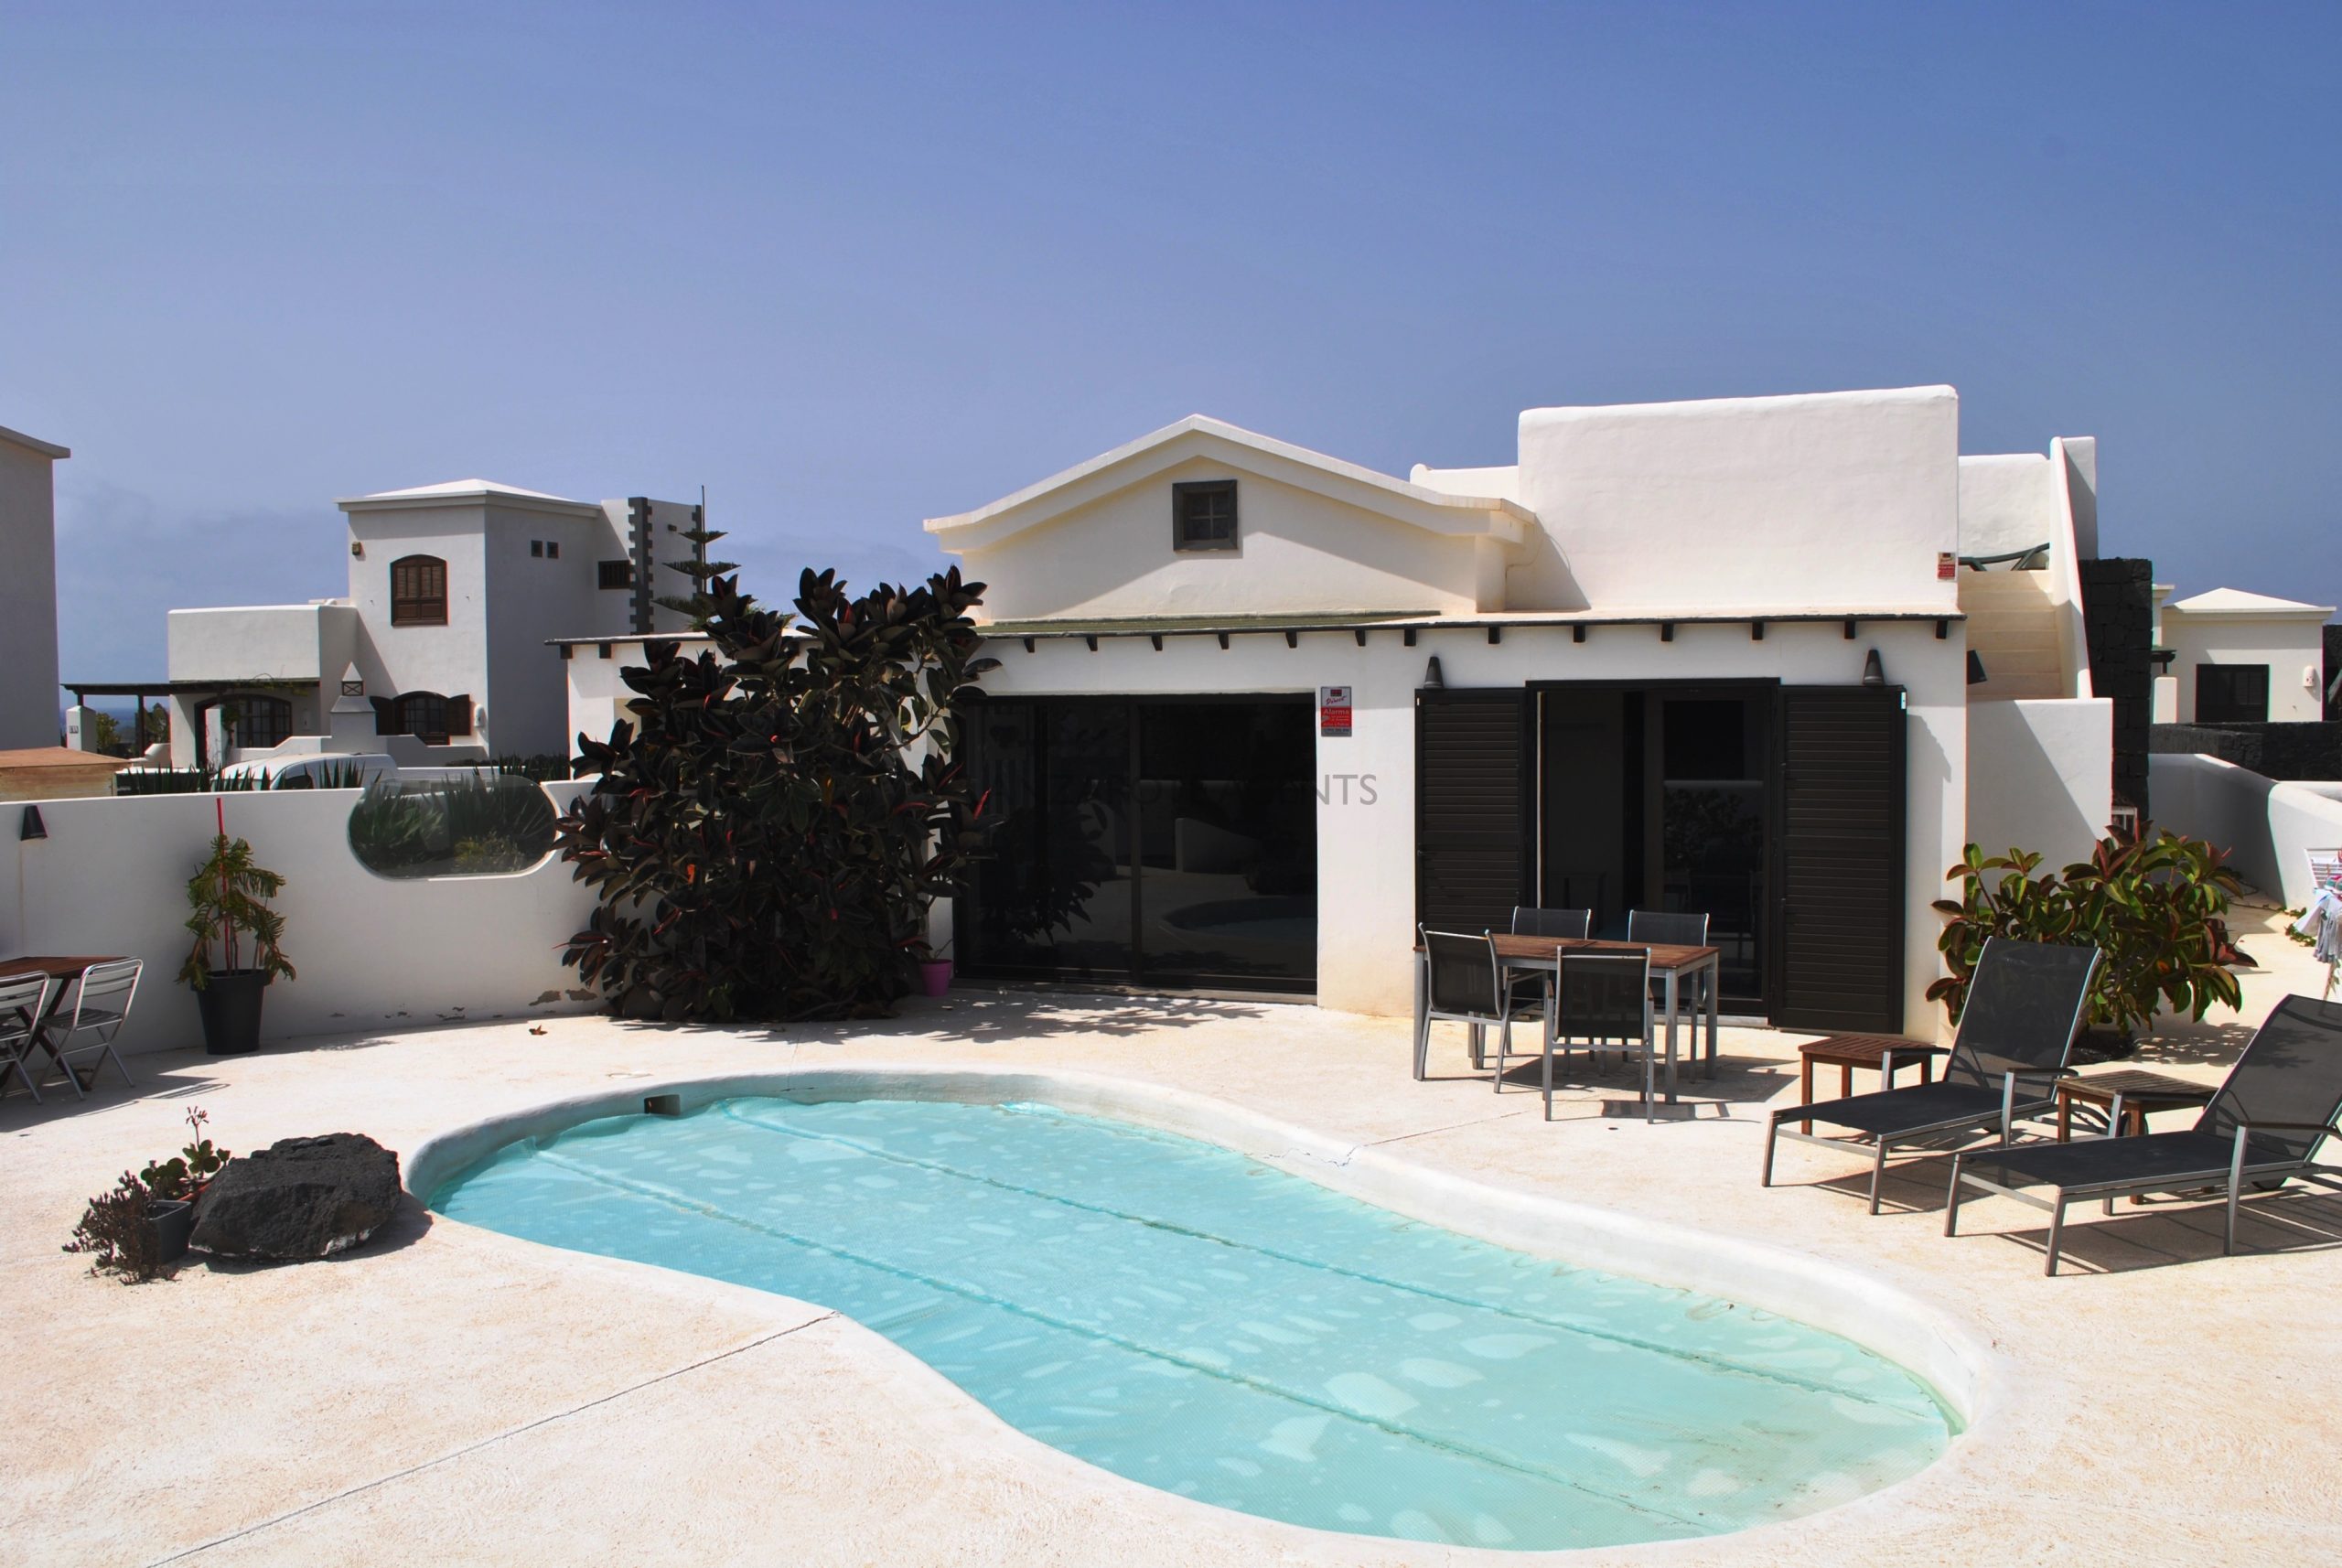 Detached 3 Bedroom Villa with Private Pool in the Playa Blanca and Sea and Mountain Views